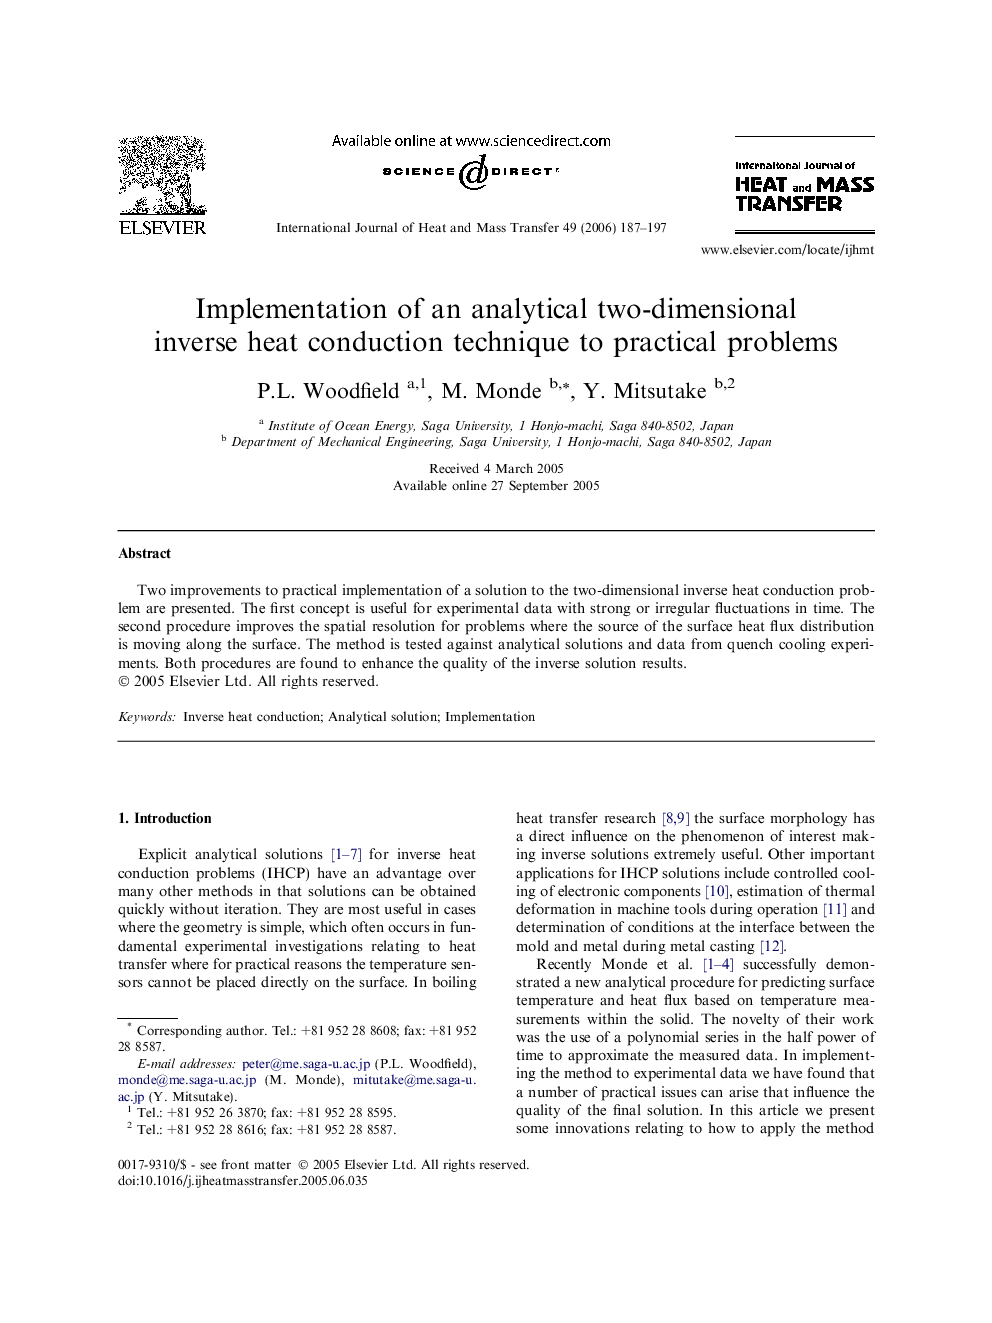 Implementation of an analytical two-dimensional inverse heat conduction technique to practical problems